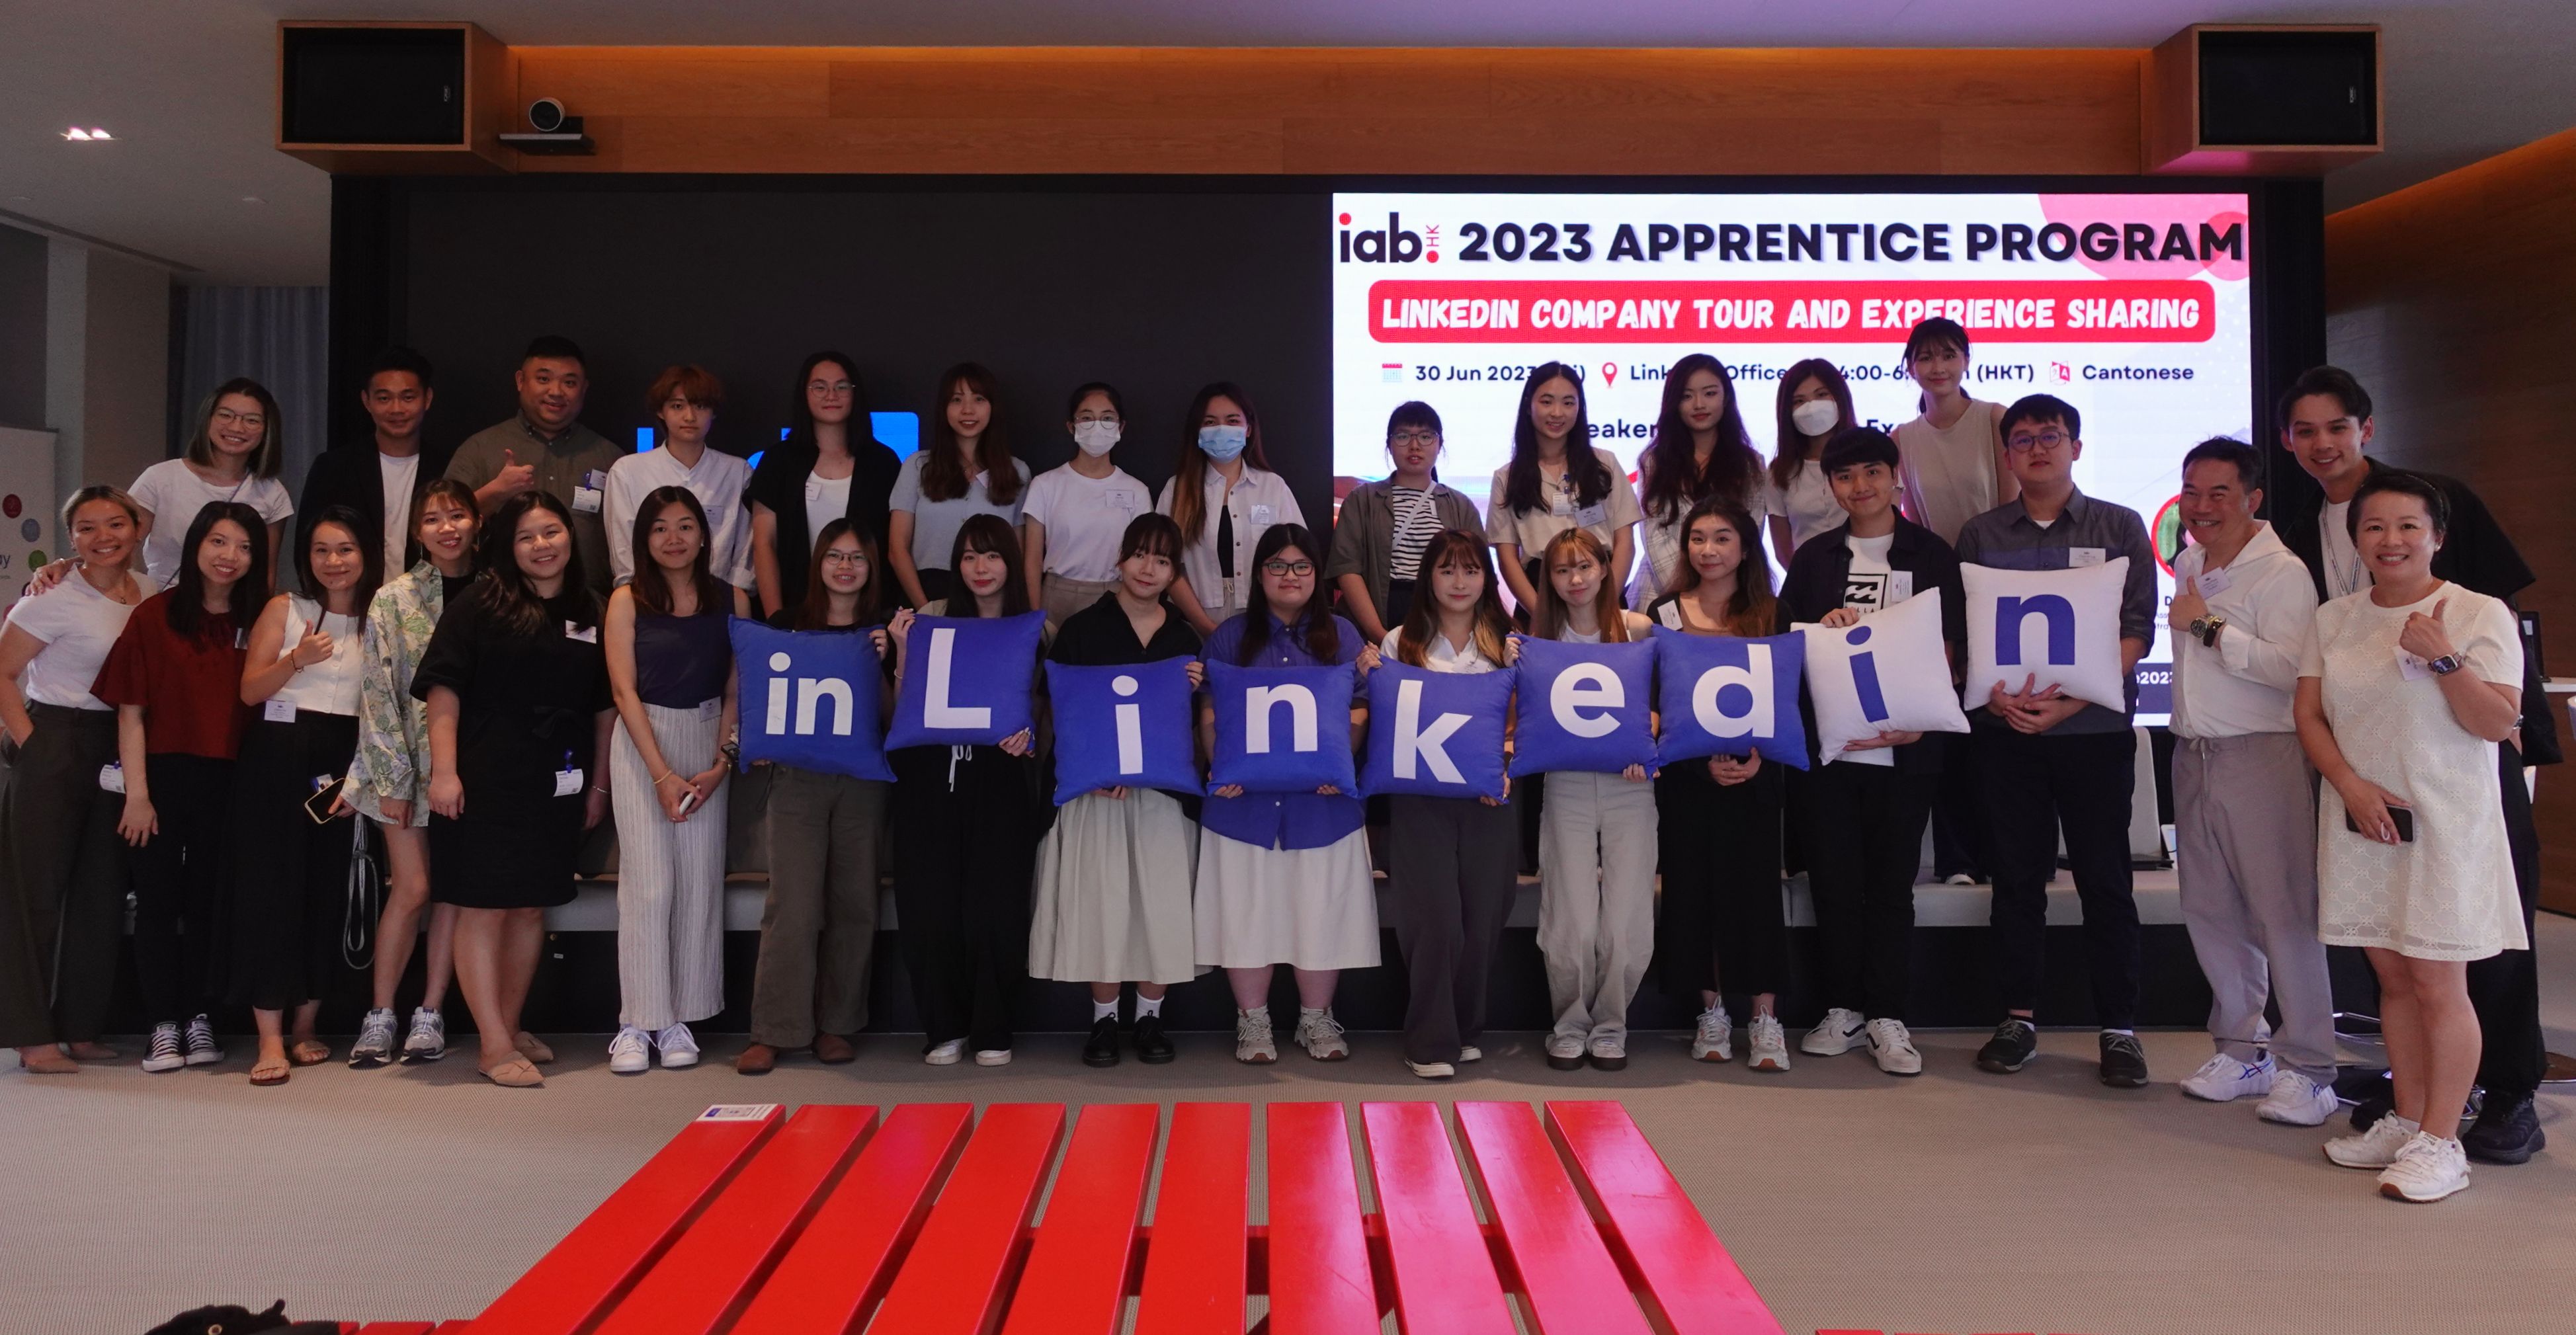 2023 Apprentice Program LinkedIn Company Tour and Experience Sharing